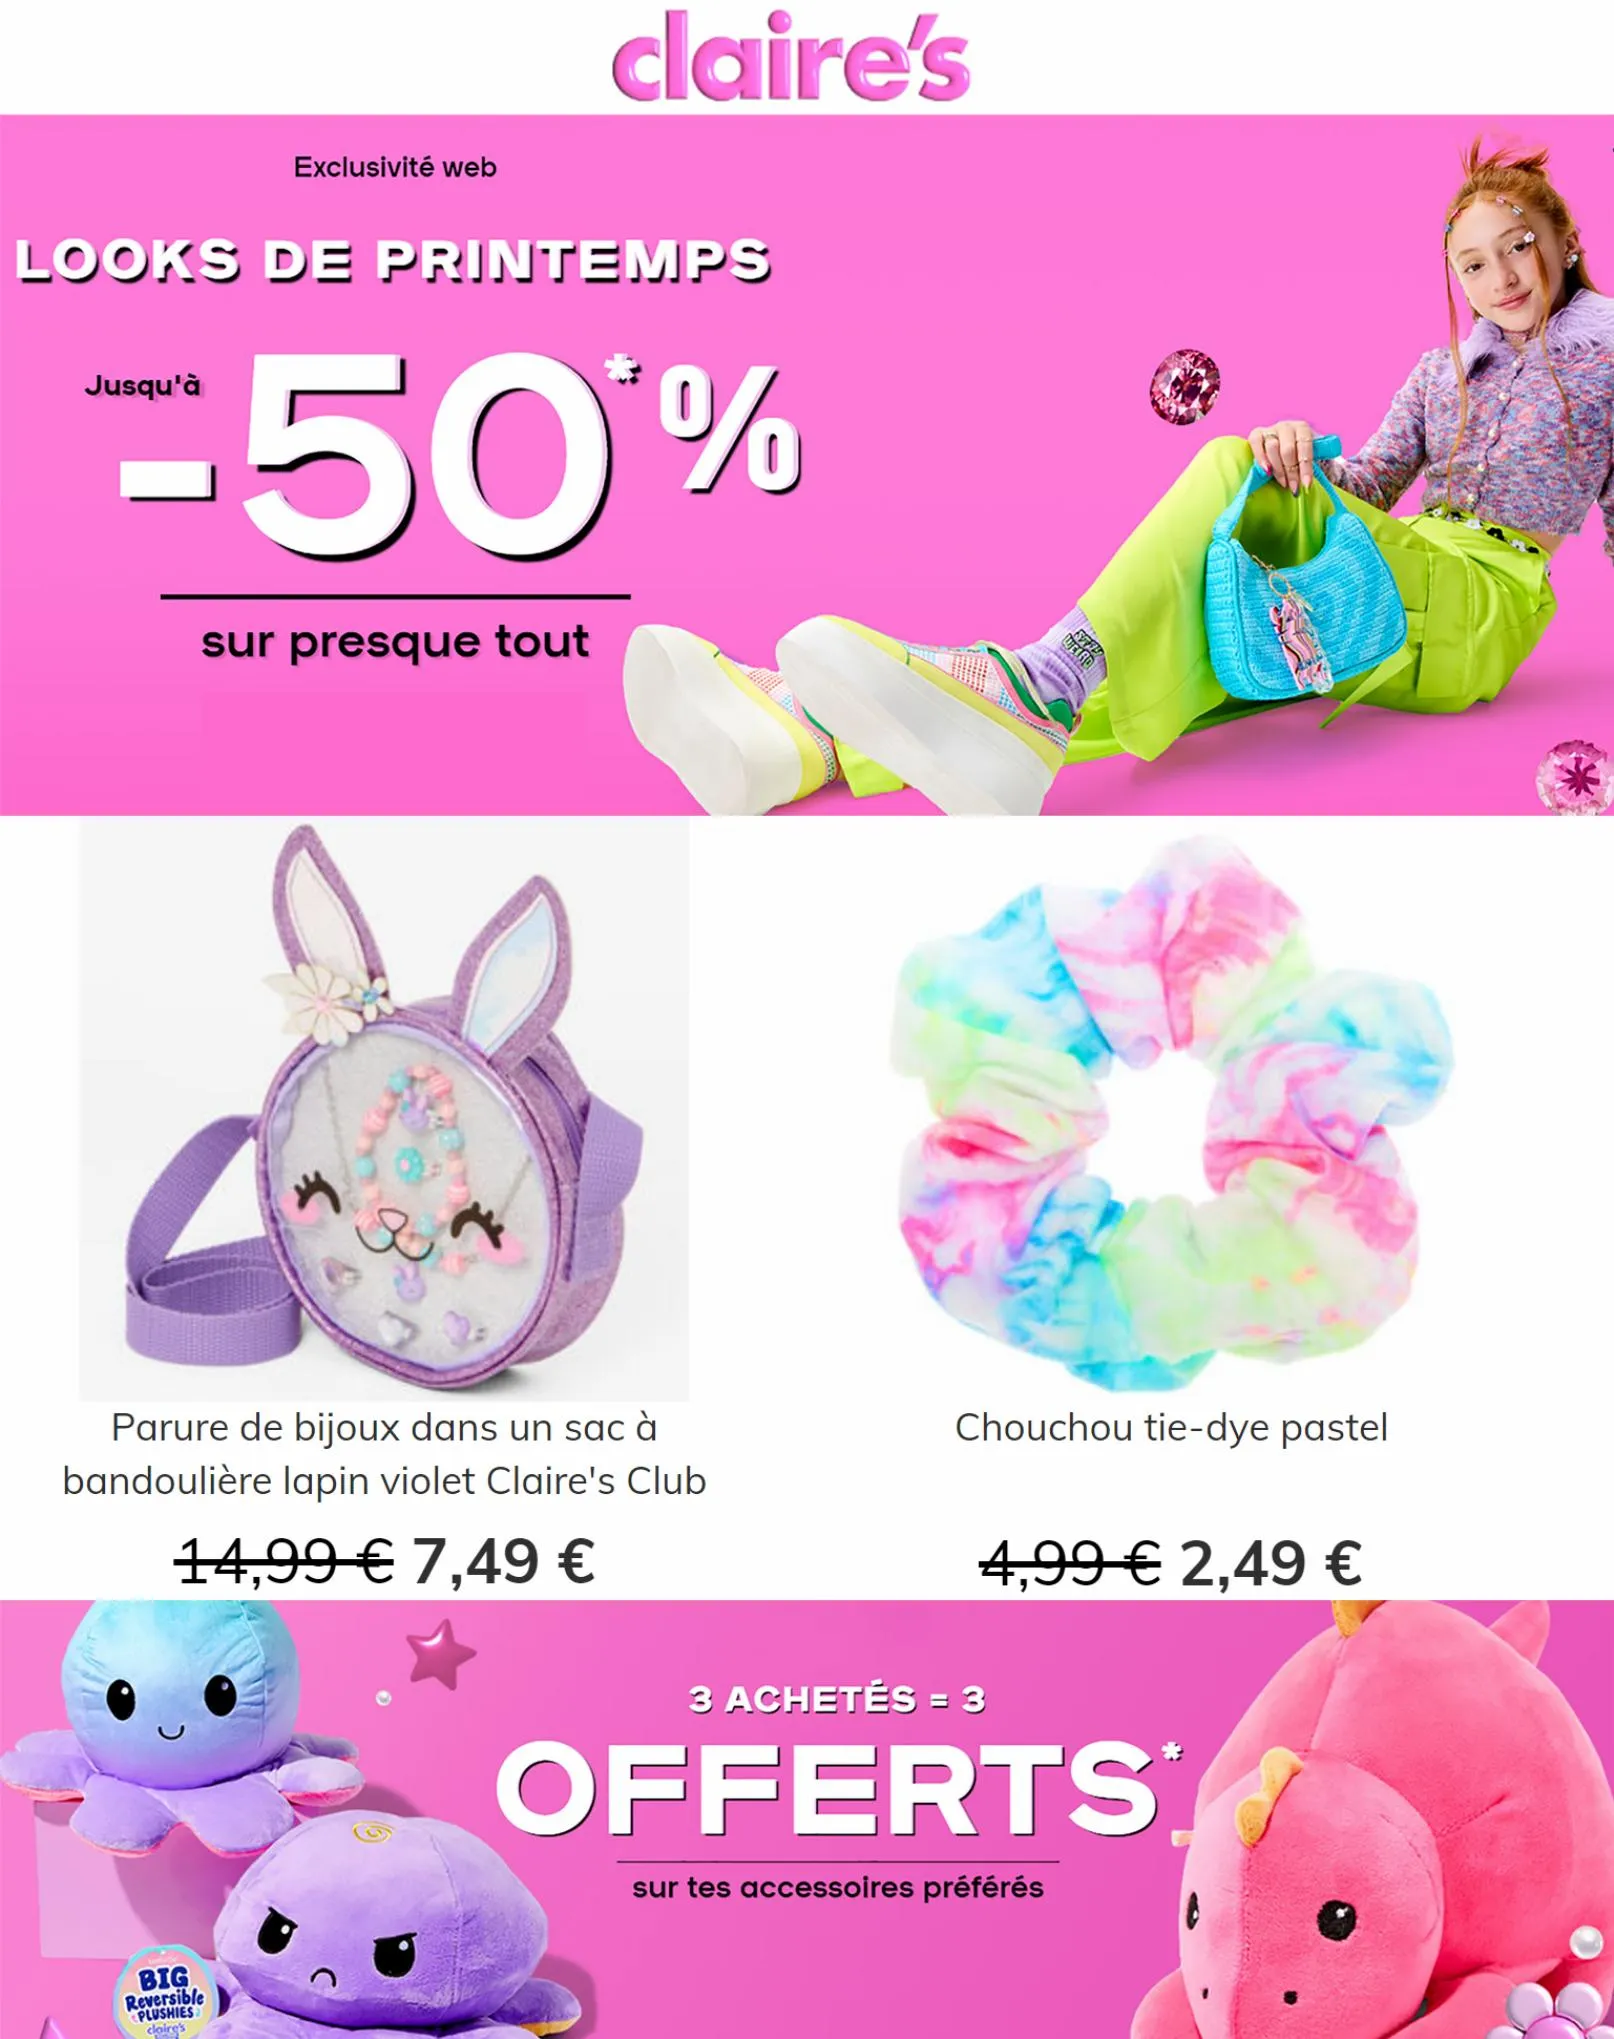 Catalogue Offres Speciales -50%!, page 00001